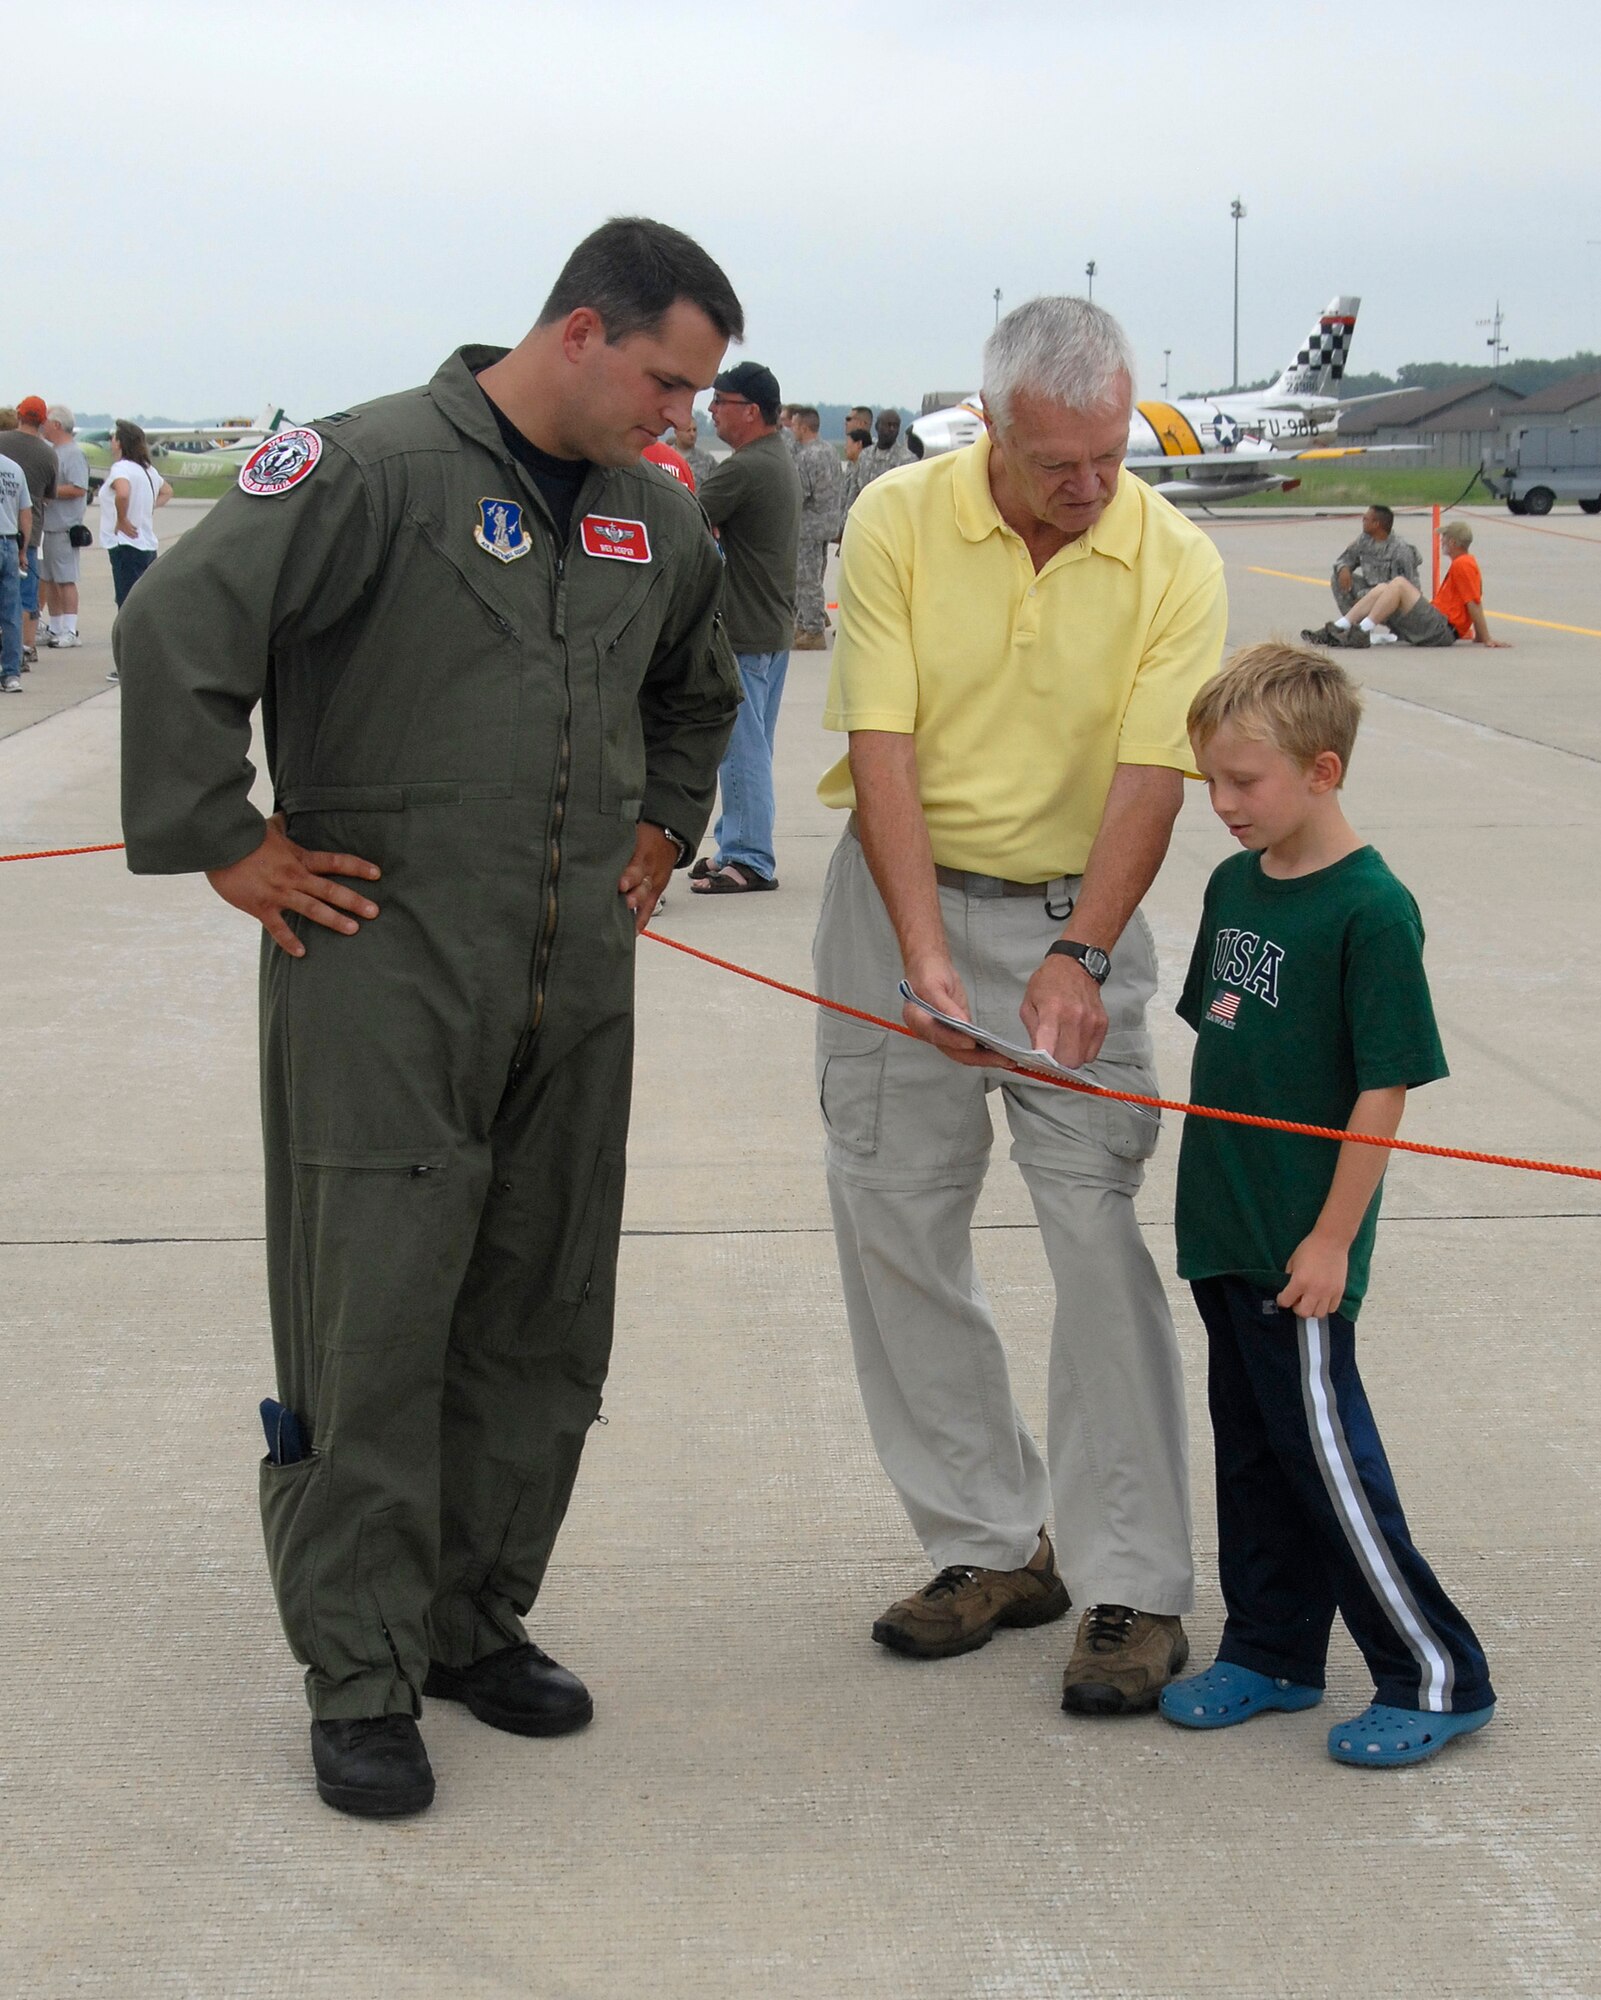 Volk Field range officer and F-16 pilot Capt. Wes Hoeper answers questions about the F-16 Fighting Falcon to attendees of the Volk Field Air National Guard Base open house on August 21, 2010. Despite inclement weather, the Volk Field Open house attracted approximately 3000 visitors, 20 military and civilian aircraft, numerous vendors, and aerial performers from across the country.(U.S. Air Force photo by Staff Sgt. Christen Bloomfield)